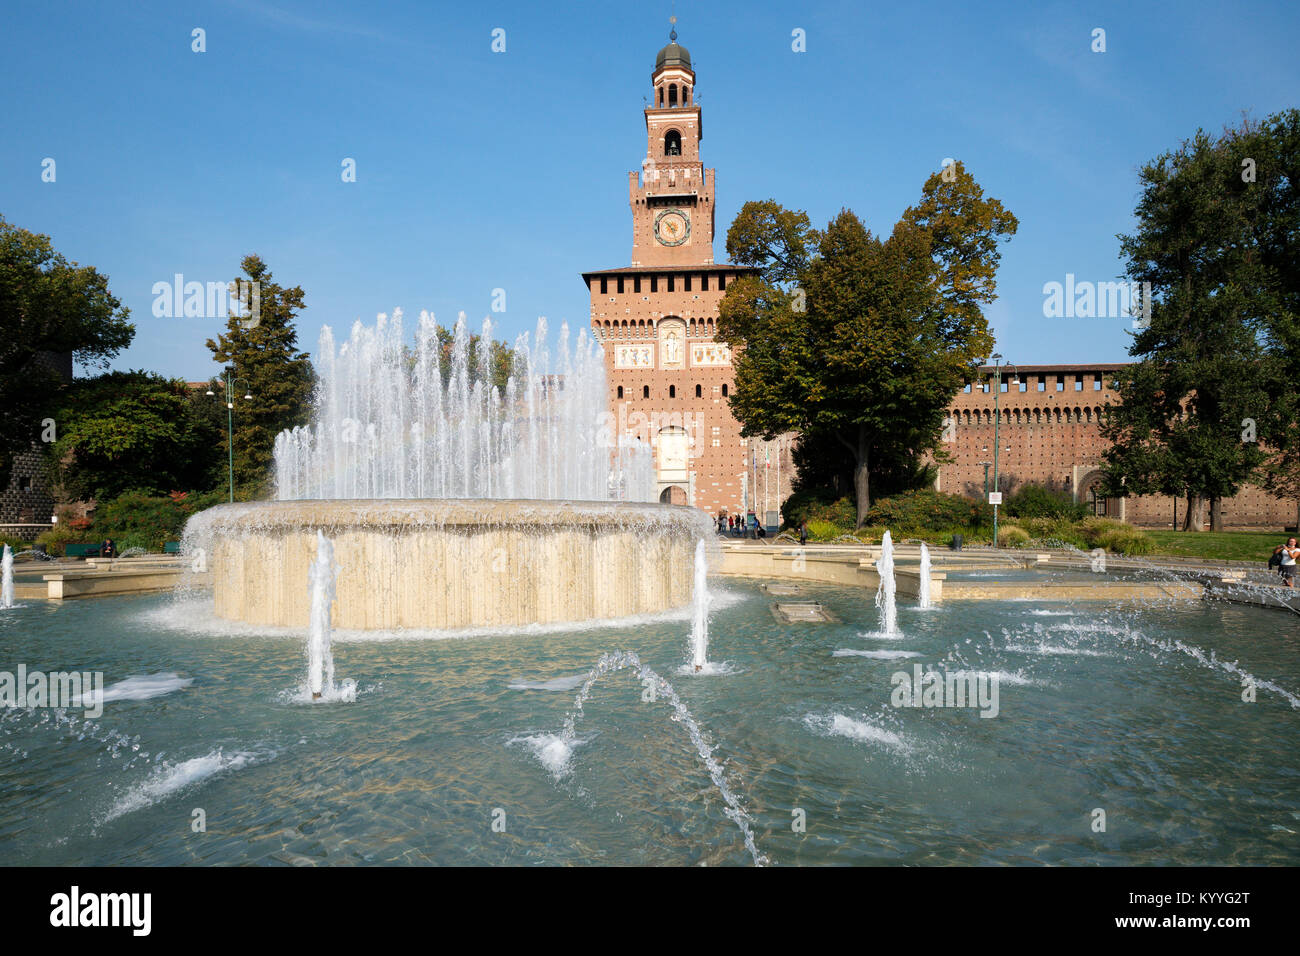 Italy, Lombardy, Milan, Piazza Castello. The fountains outside the main entrance to the Filarete tower, Sforza castle Stock Photo